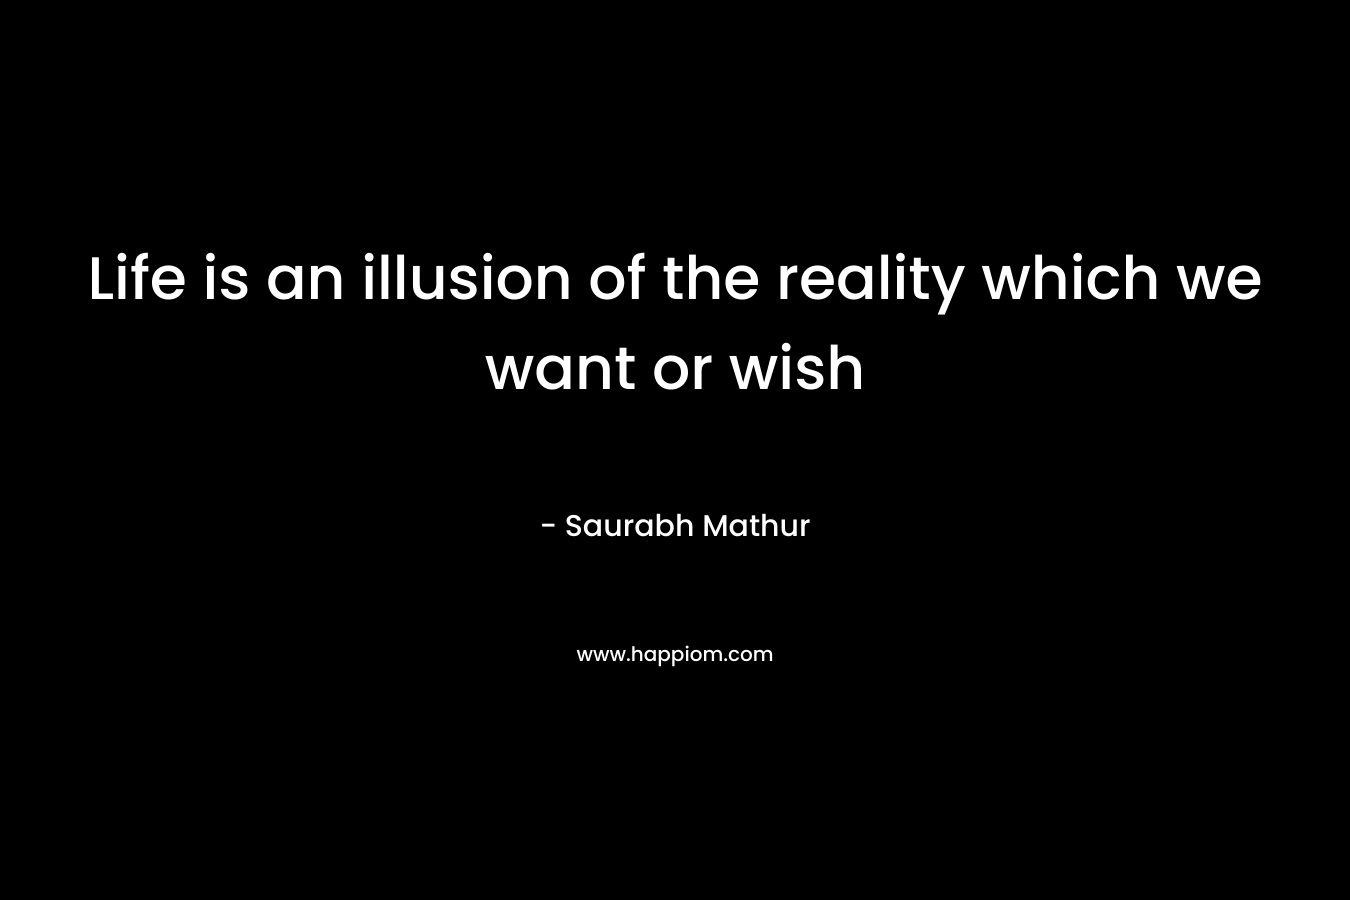 Life is an illusion of the reality which we want or wish